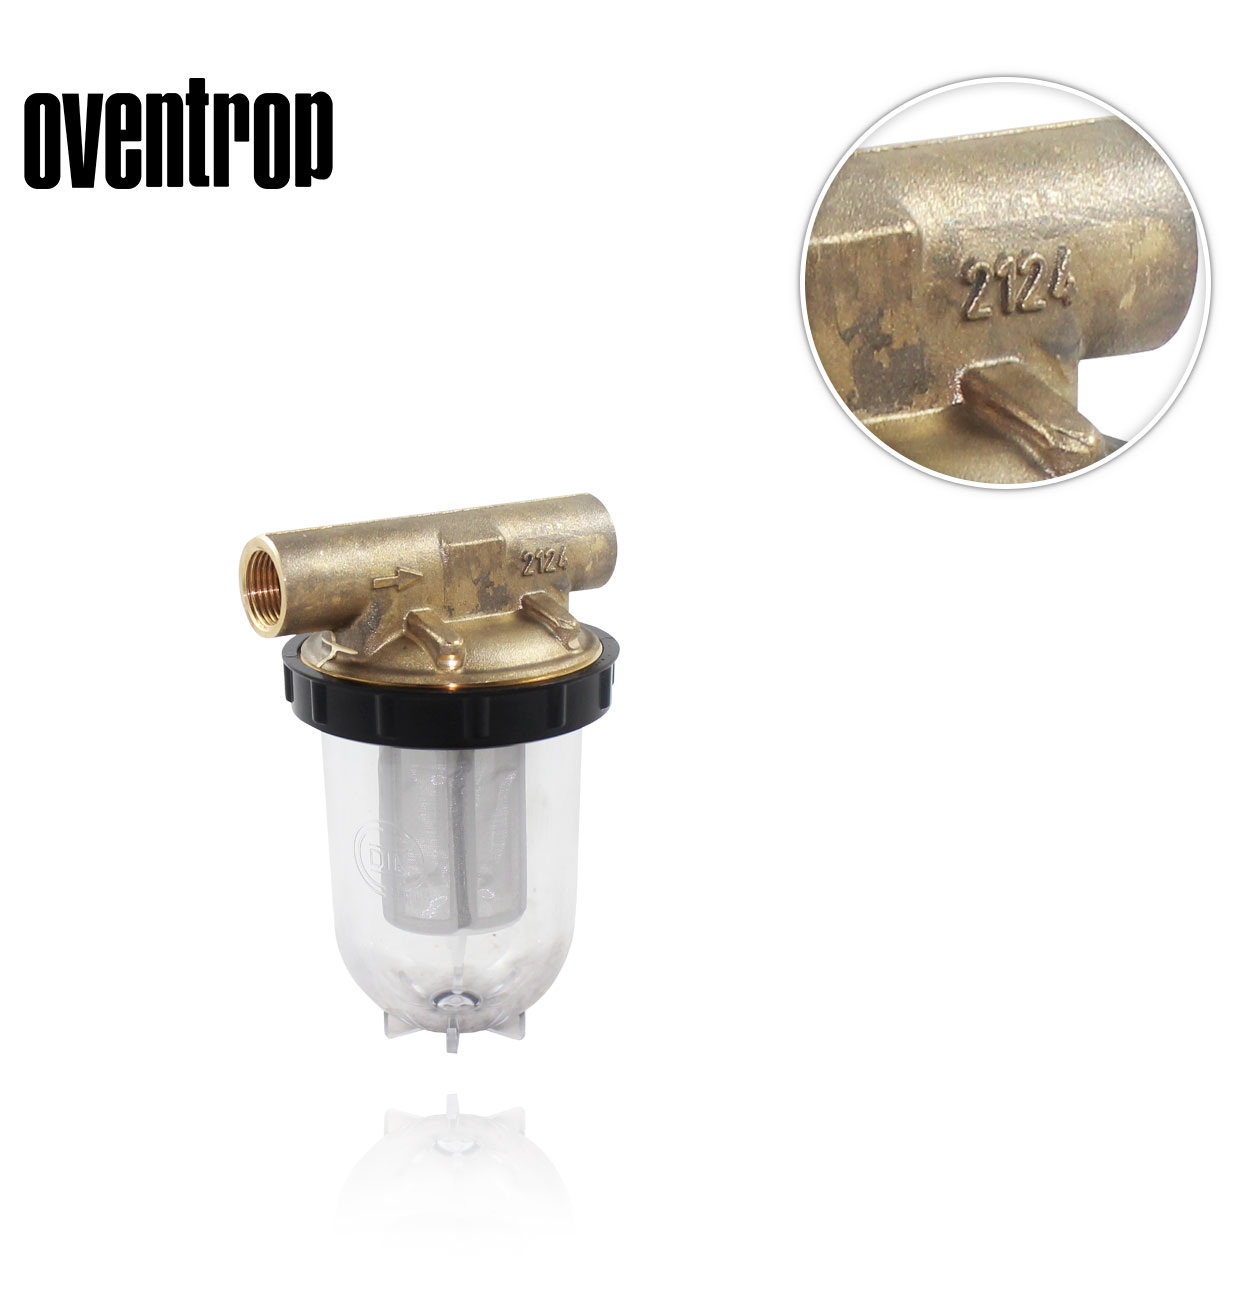 3/8" GAS OIL FILTER with 50-75µm SIKU OVENTROP filter